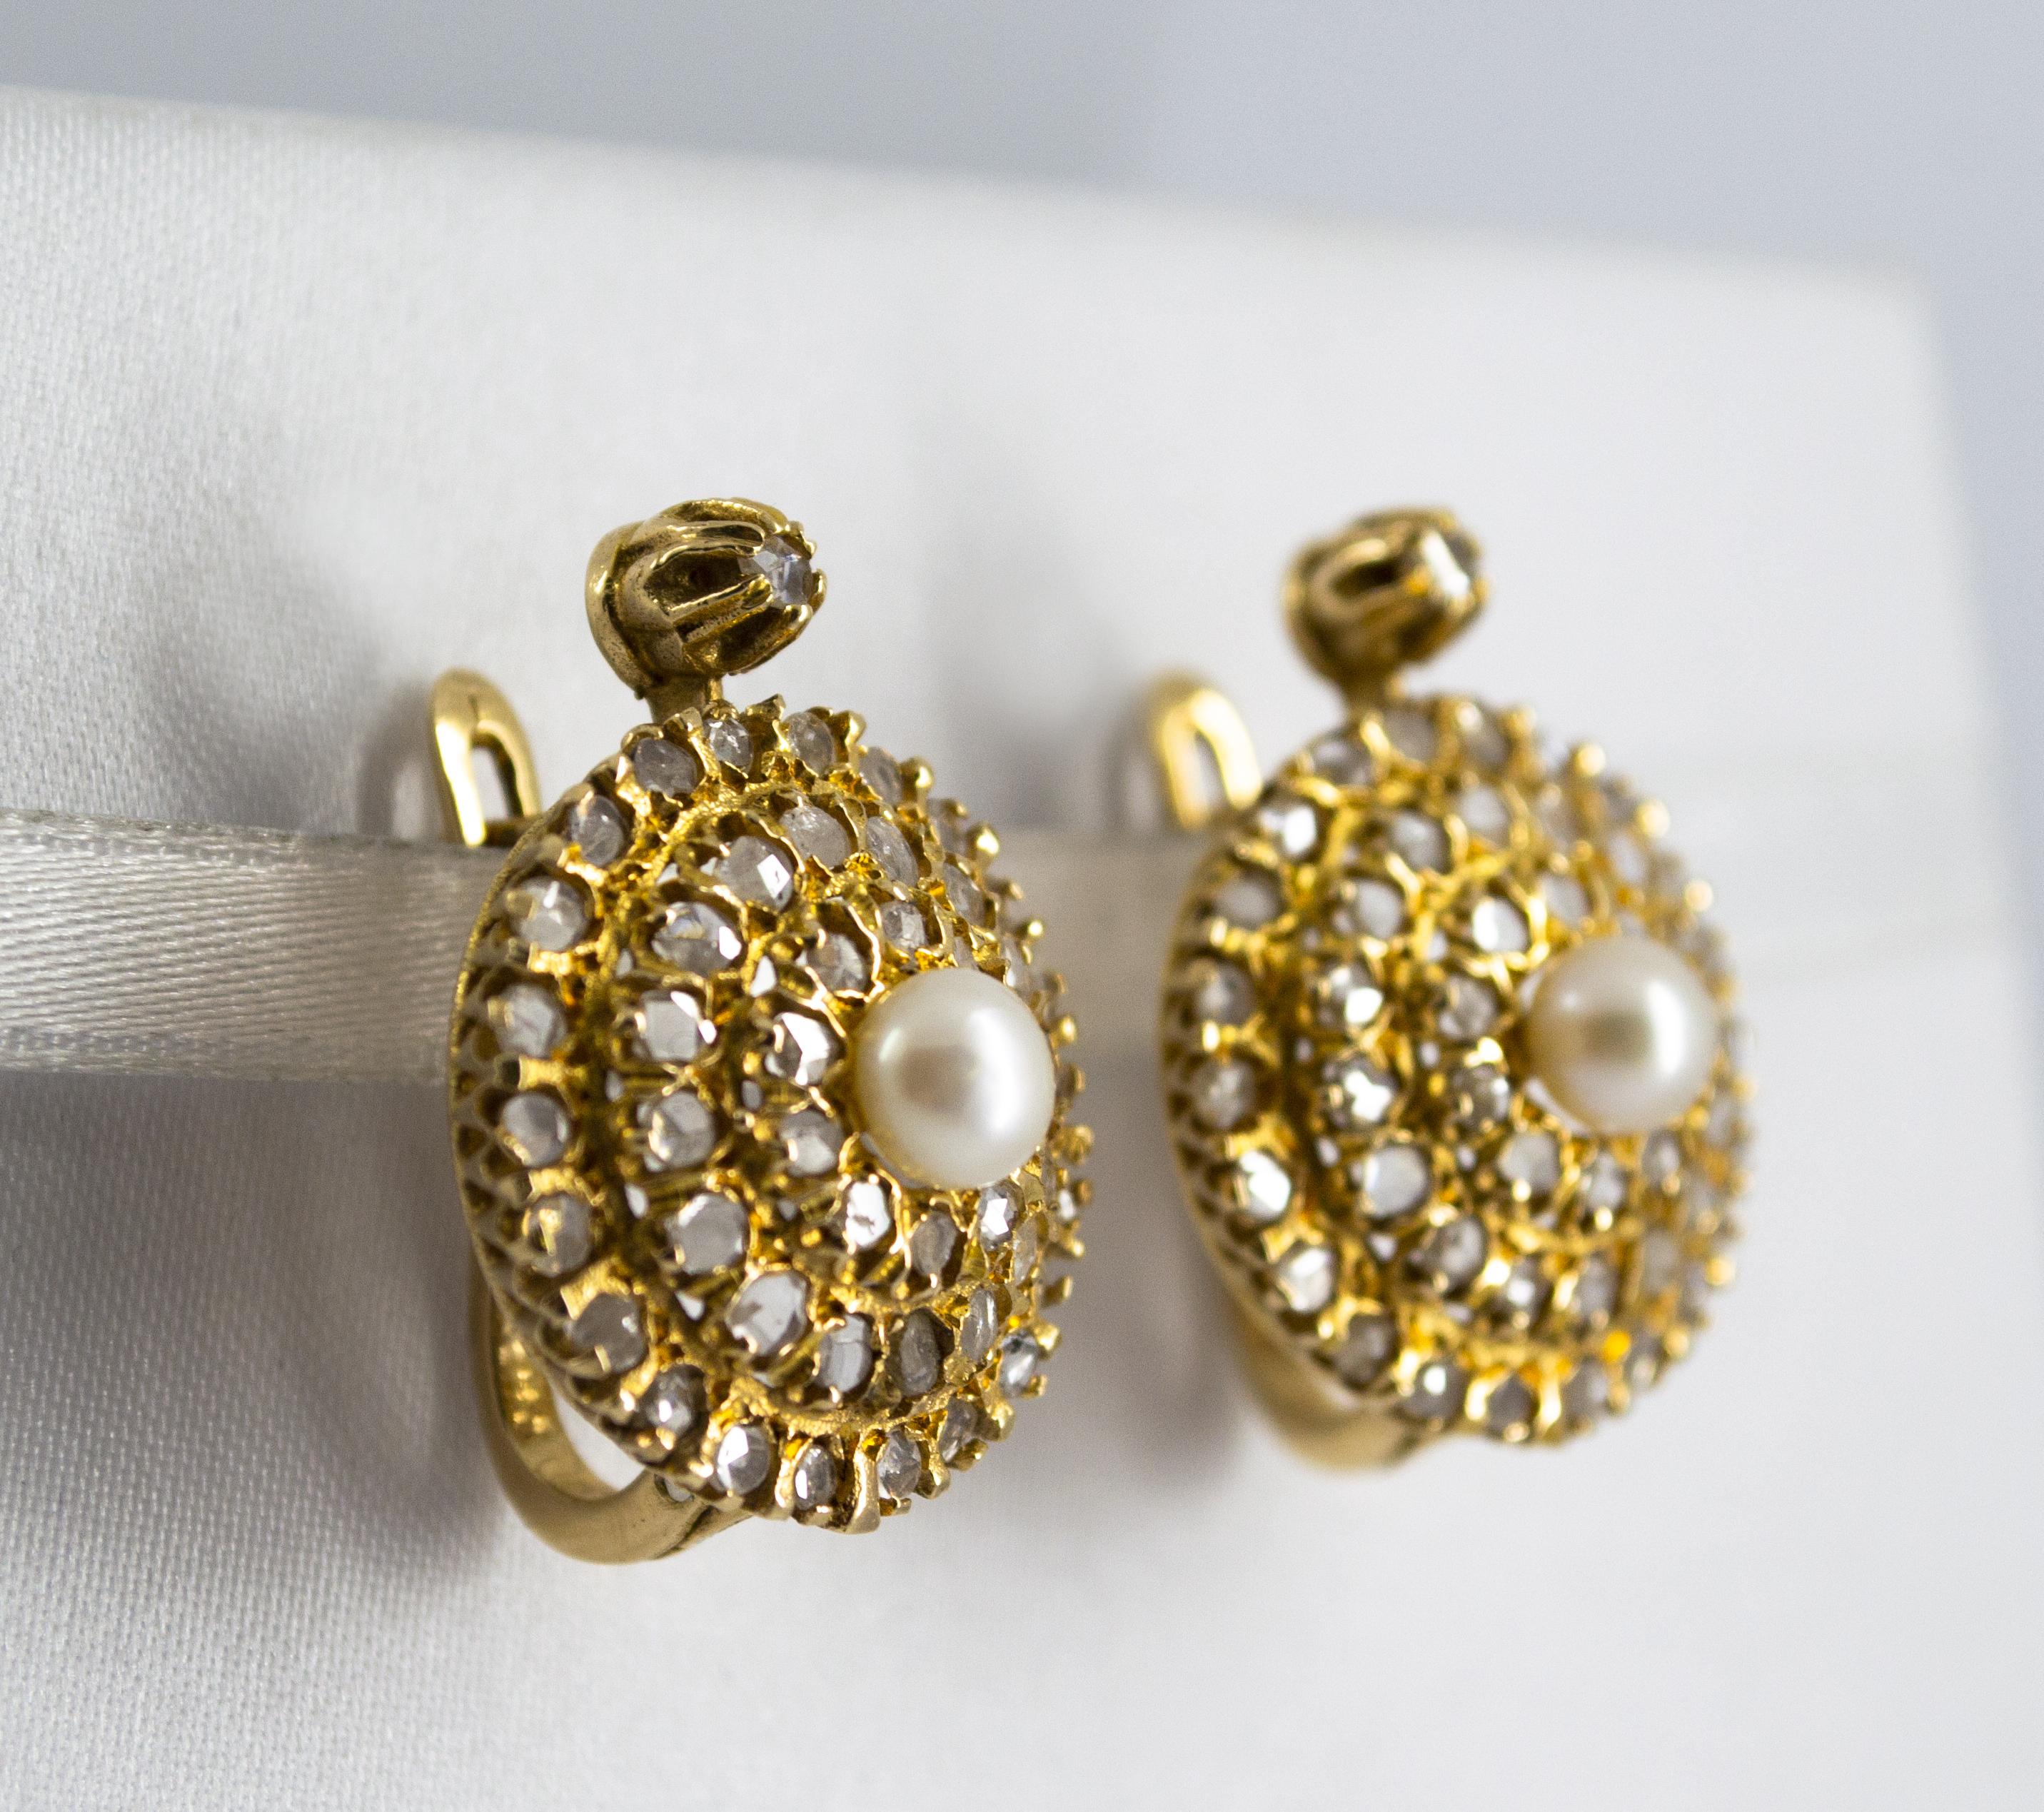 These Earrings are made of 9K Yellow Gold.
These Earrings have 2.20 Carats of Diamonds.
These Earrings has Pearls.
All our Earrings have pins for pierced ears but we can change the closure and make any of our Earrings suitable even for non-pierced